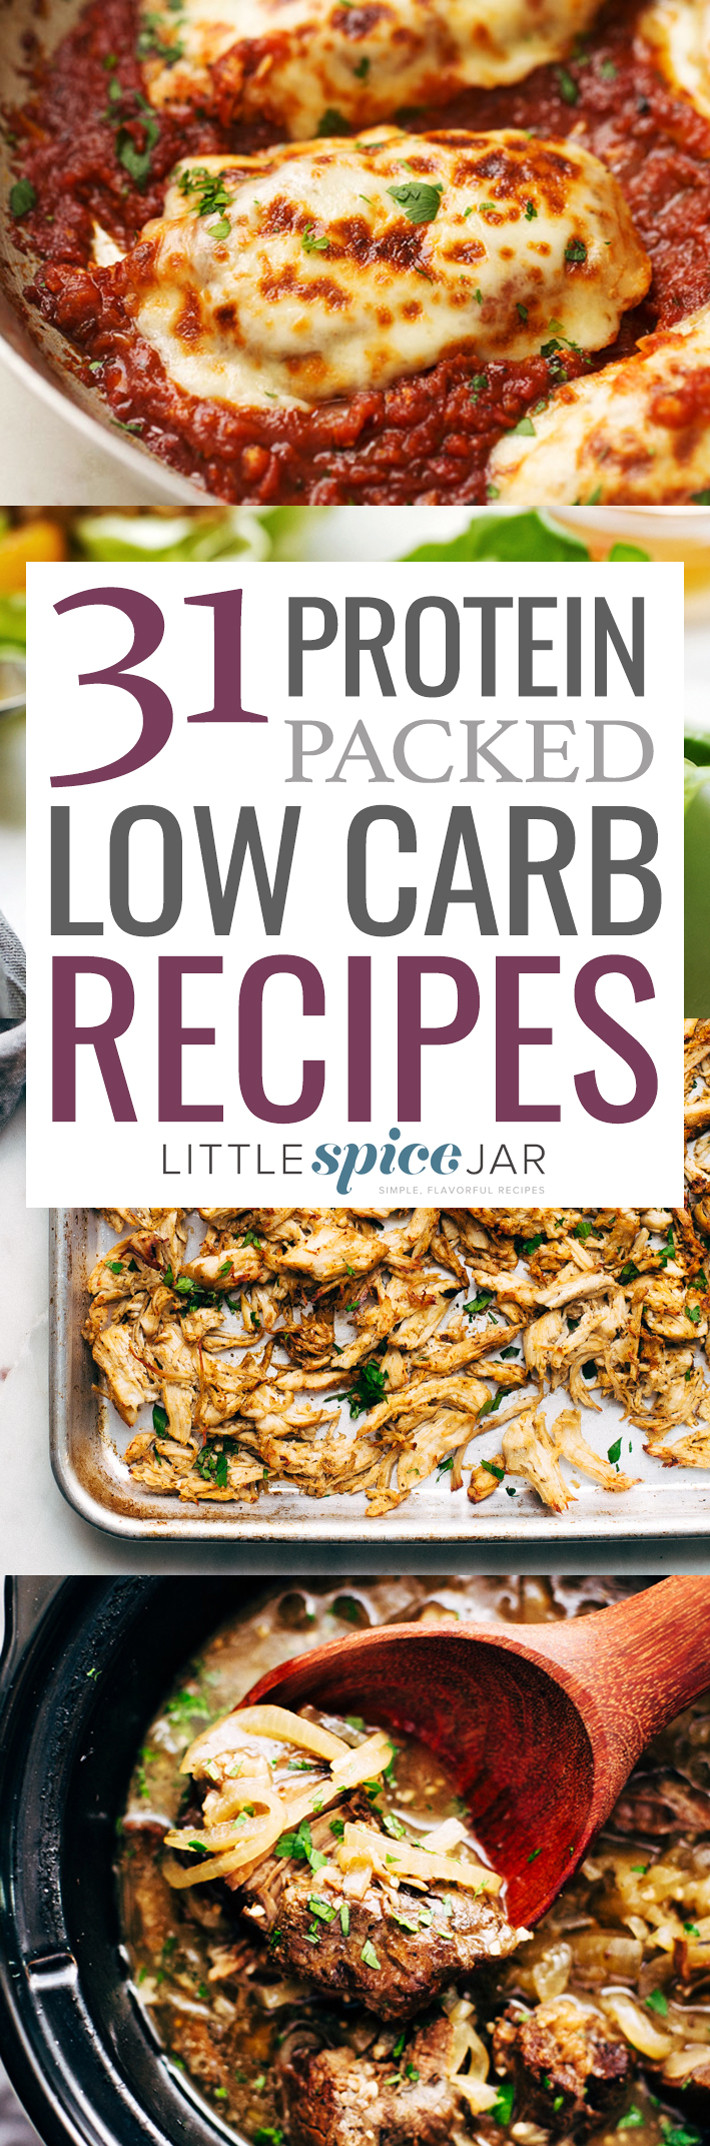 Low Calorie High Protein Recipes
 31 Protein Packed Low Carb Recipes